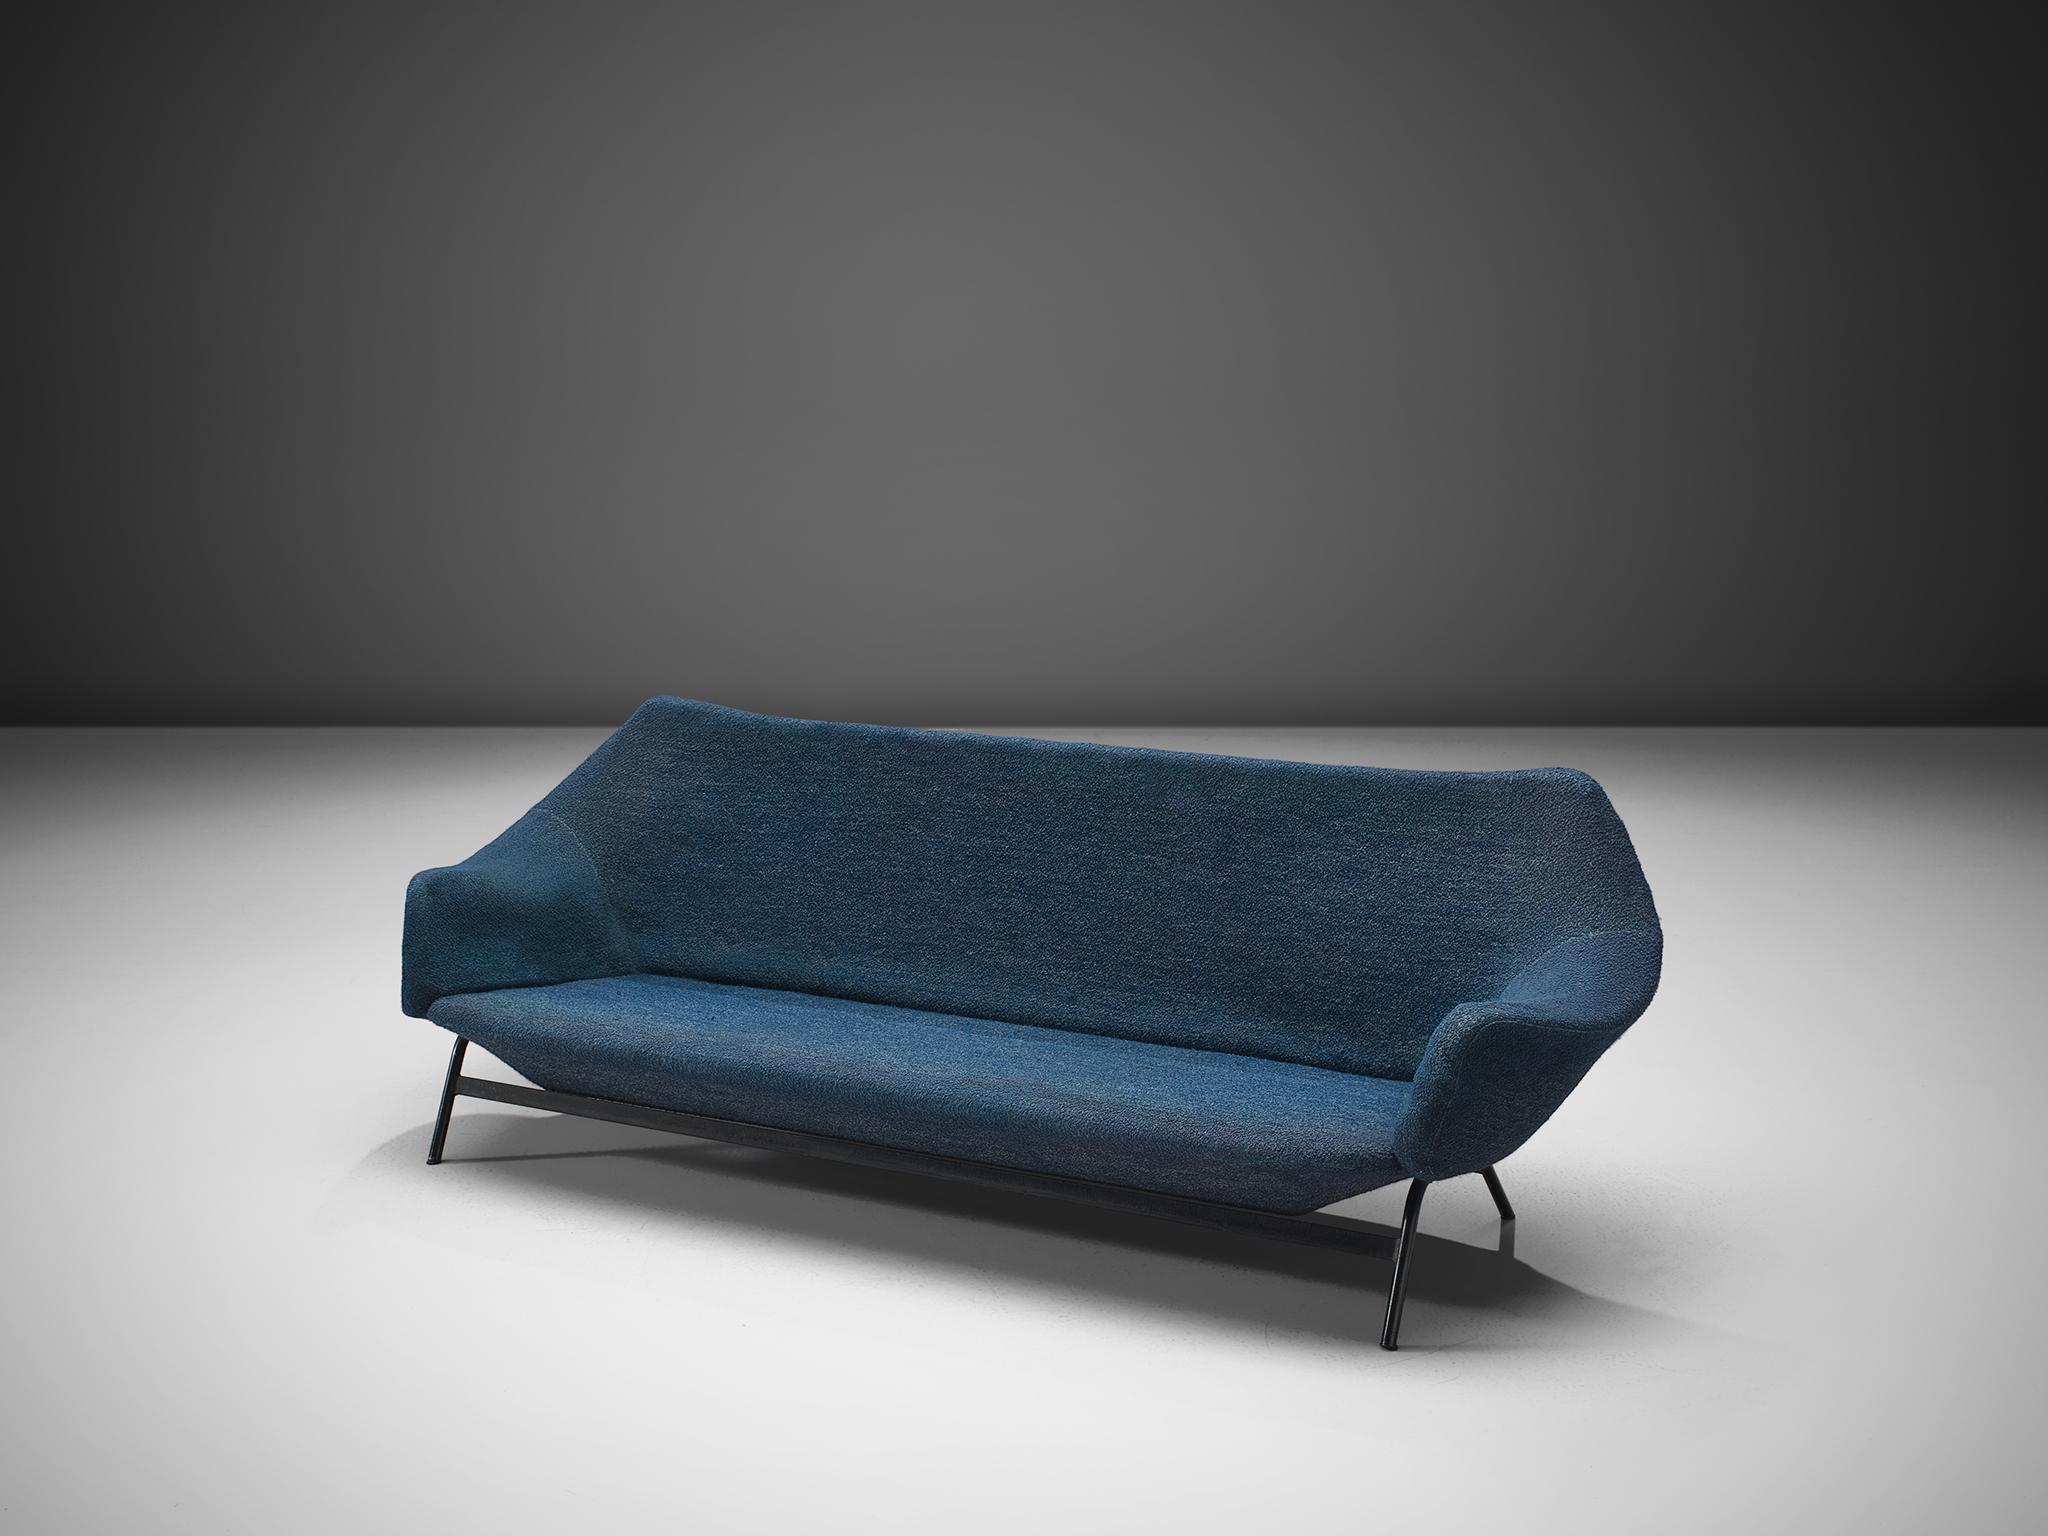 Sofa, blue fabric and black coated metal, Italy, 1950s.

This is Italian sofa is upholstered with a sea blue fabric. Designed and made in Italy in the style of Augusto Bozzi. Elegant organic shaped settee in blue upholstery, made with nicely